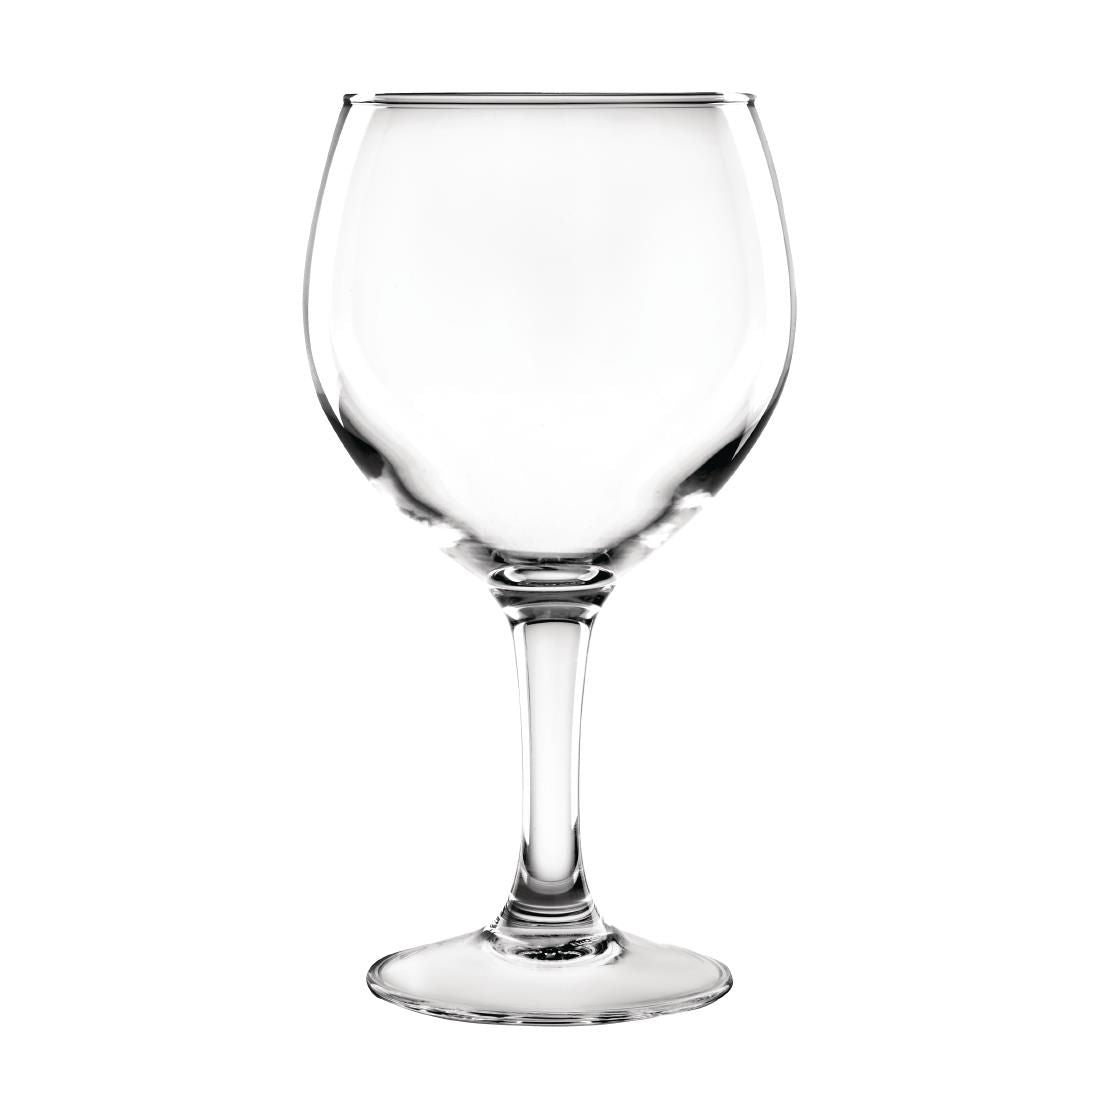 FB439 Olympia Gin Glasses 620ml (Pack of 6) JD Catering Equipment Solutions Ltd